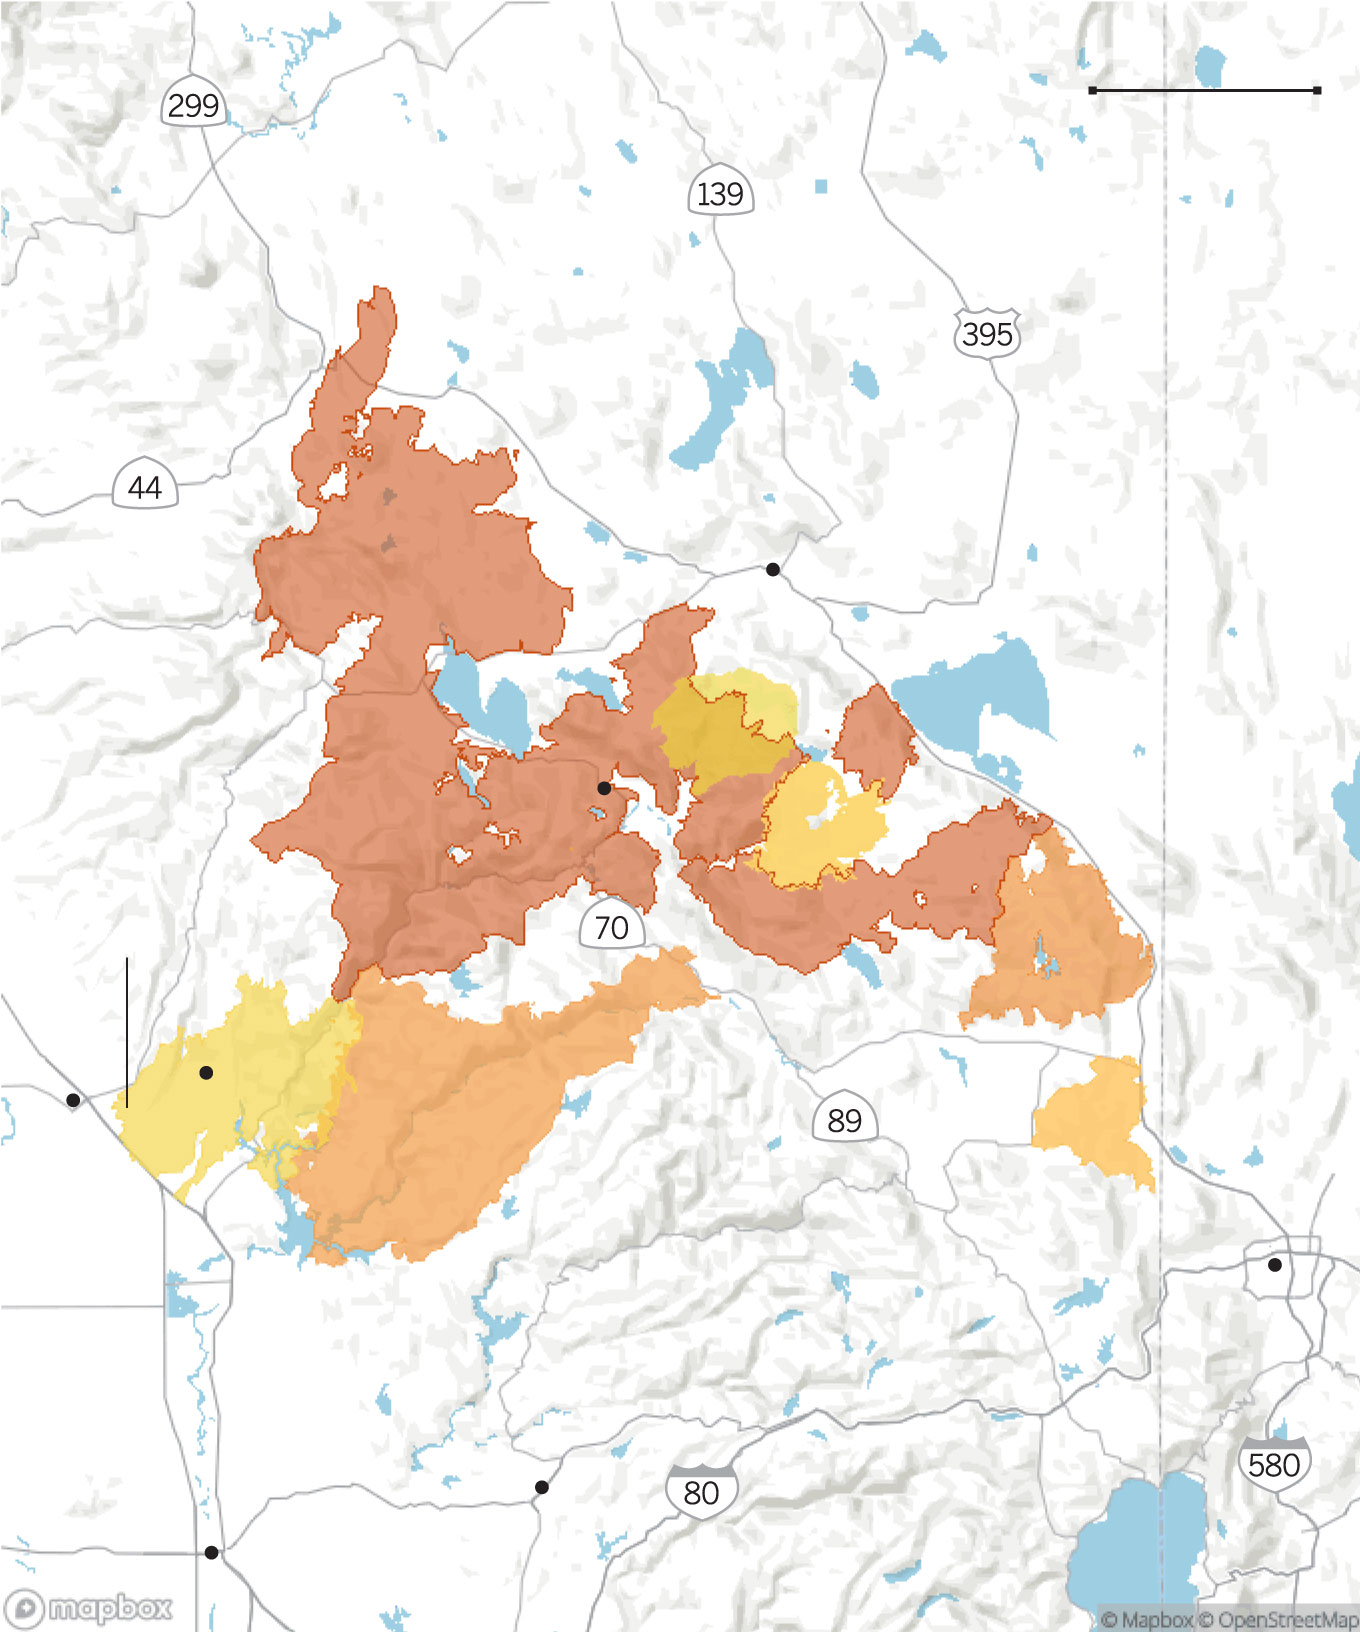 A map shows areas that burned repreatedly by wildfires north of Lake Tahoe.